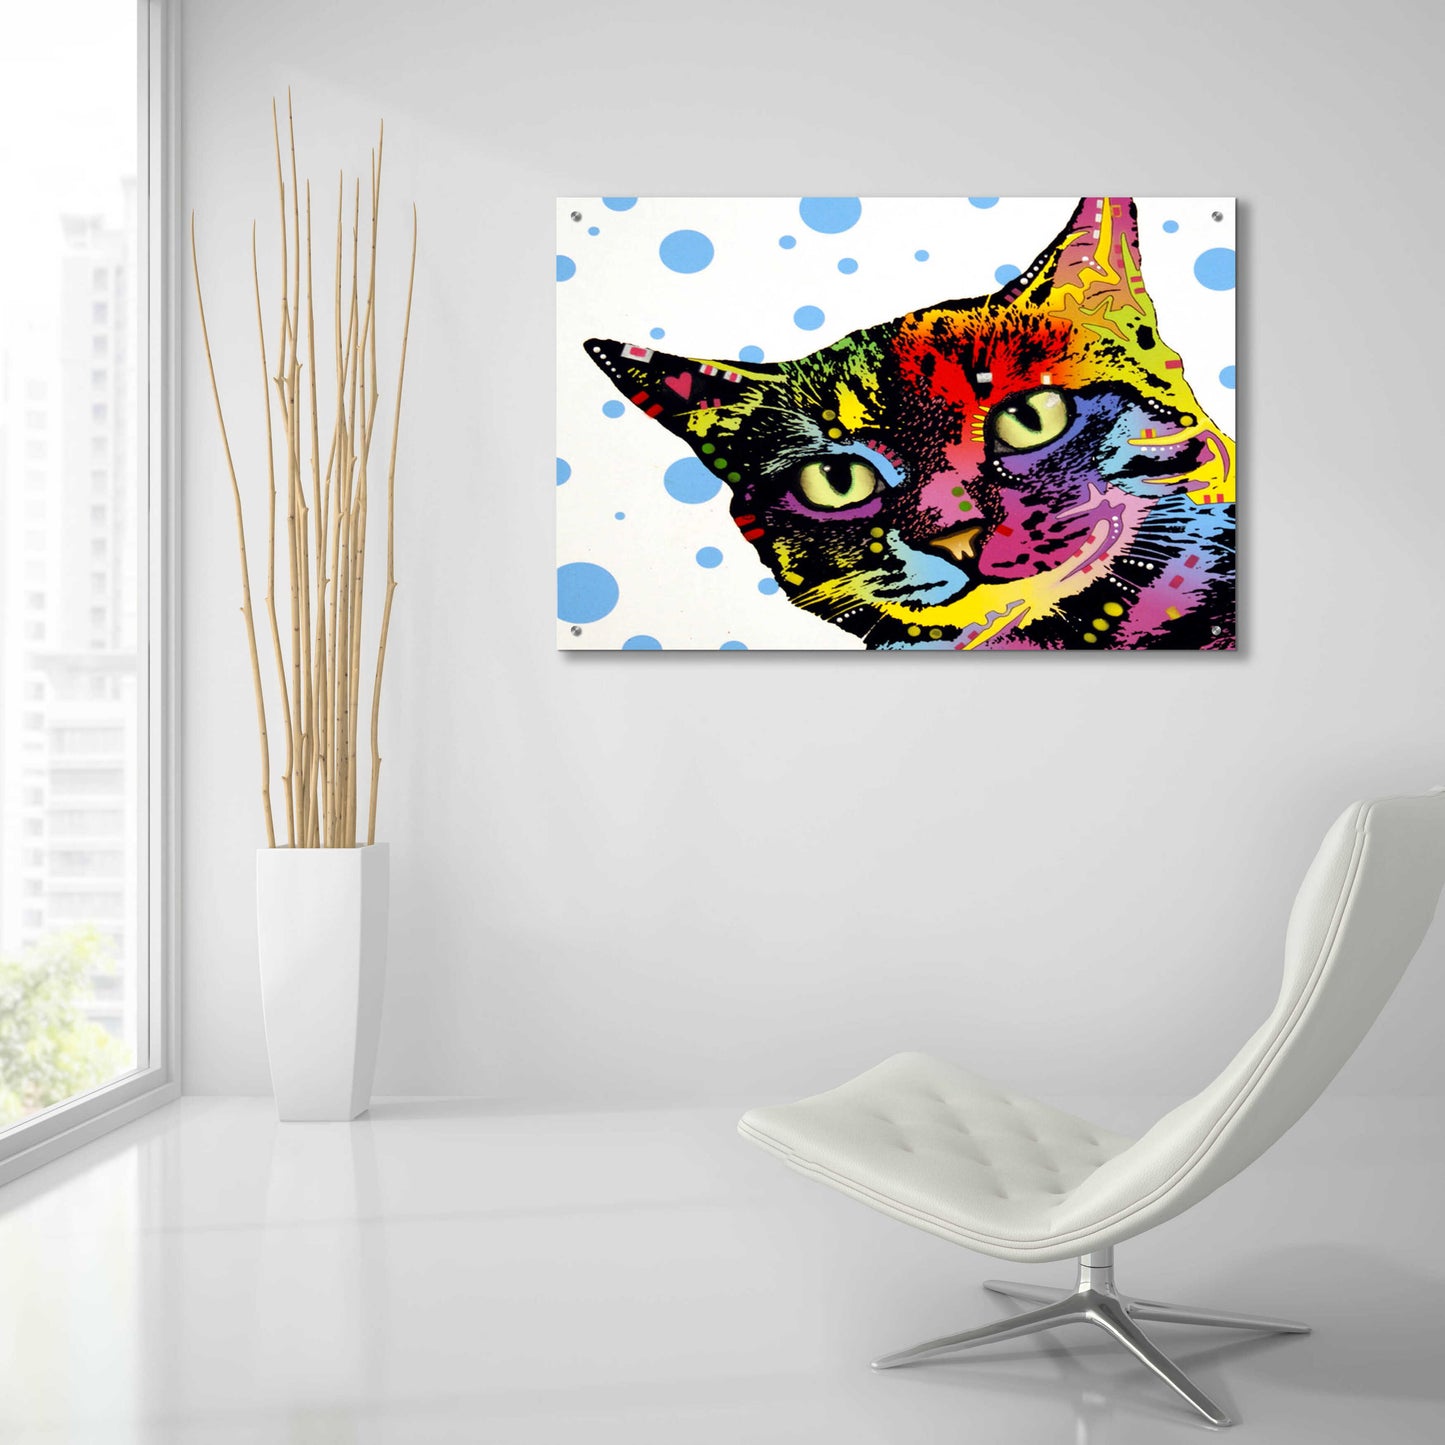 Epic Art 'The Pop Cat' by Dean Russo, Acrylic Glass Wall Art,36x24